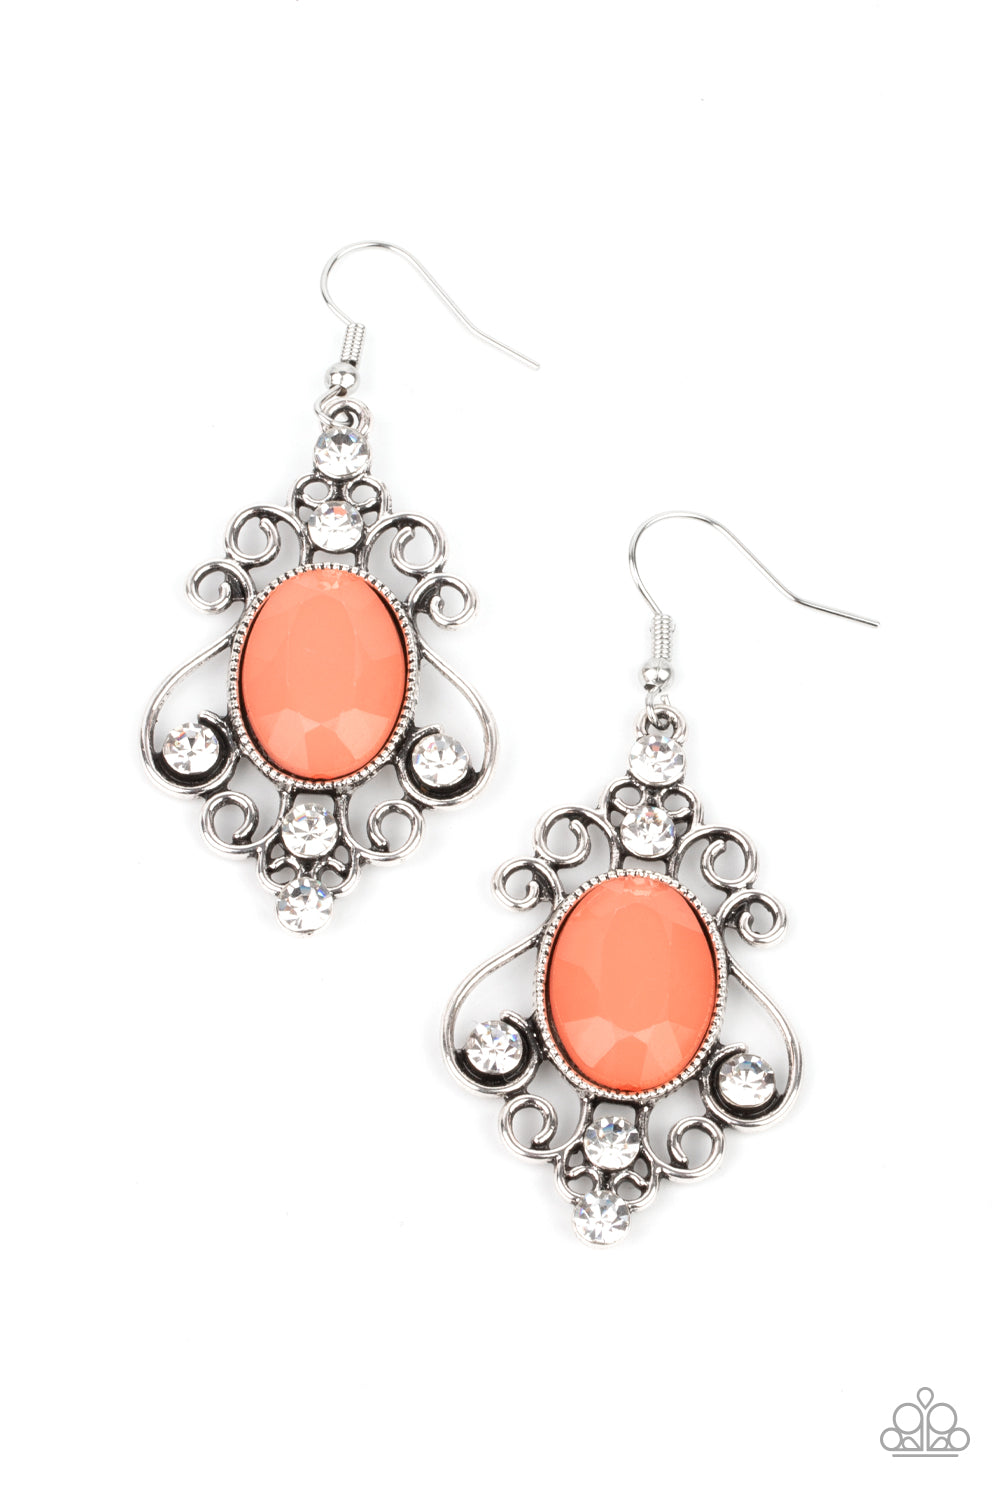 Tour de Fairytale Orange Earring - Paparazzi Accessories  Dotted with glittery white rhinestones, antiqued silver filigree flares out from an opalescent Burnt Coral gem, creating an enchanting chandelier. Earring attaches to a standard fishhook fitting.  All Paparazzi Accessories are lead free and nickel free!  Sold as one pair of earrings.